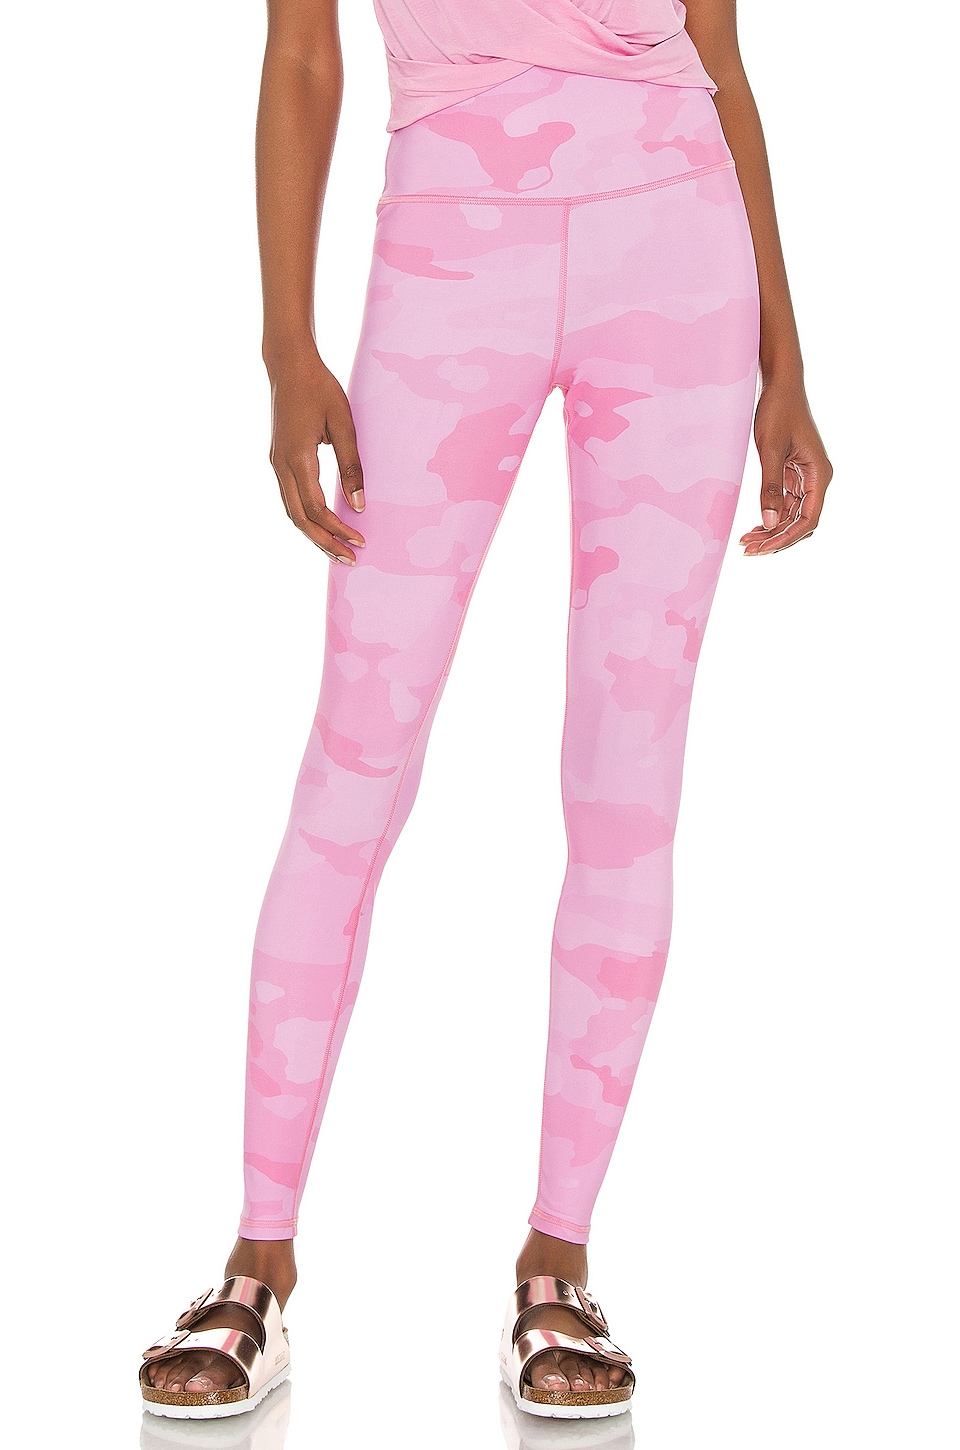 Pink Camo Leggings with Pockets - ShopperBoard